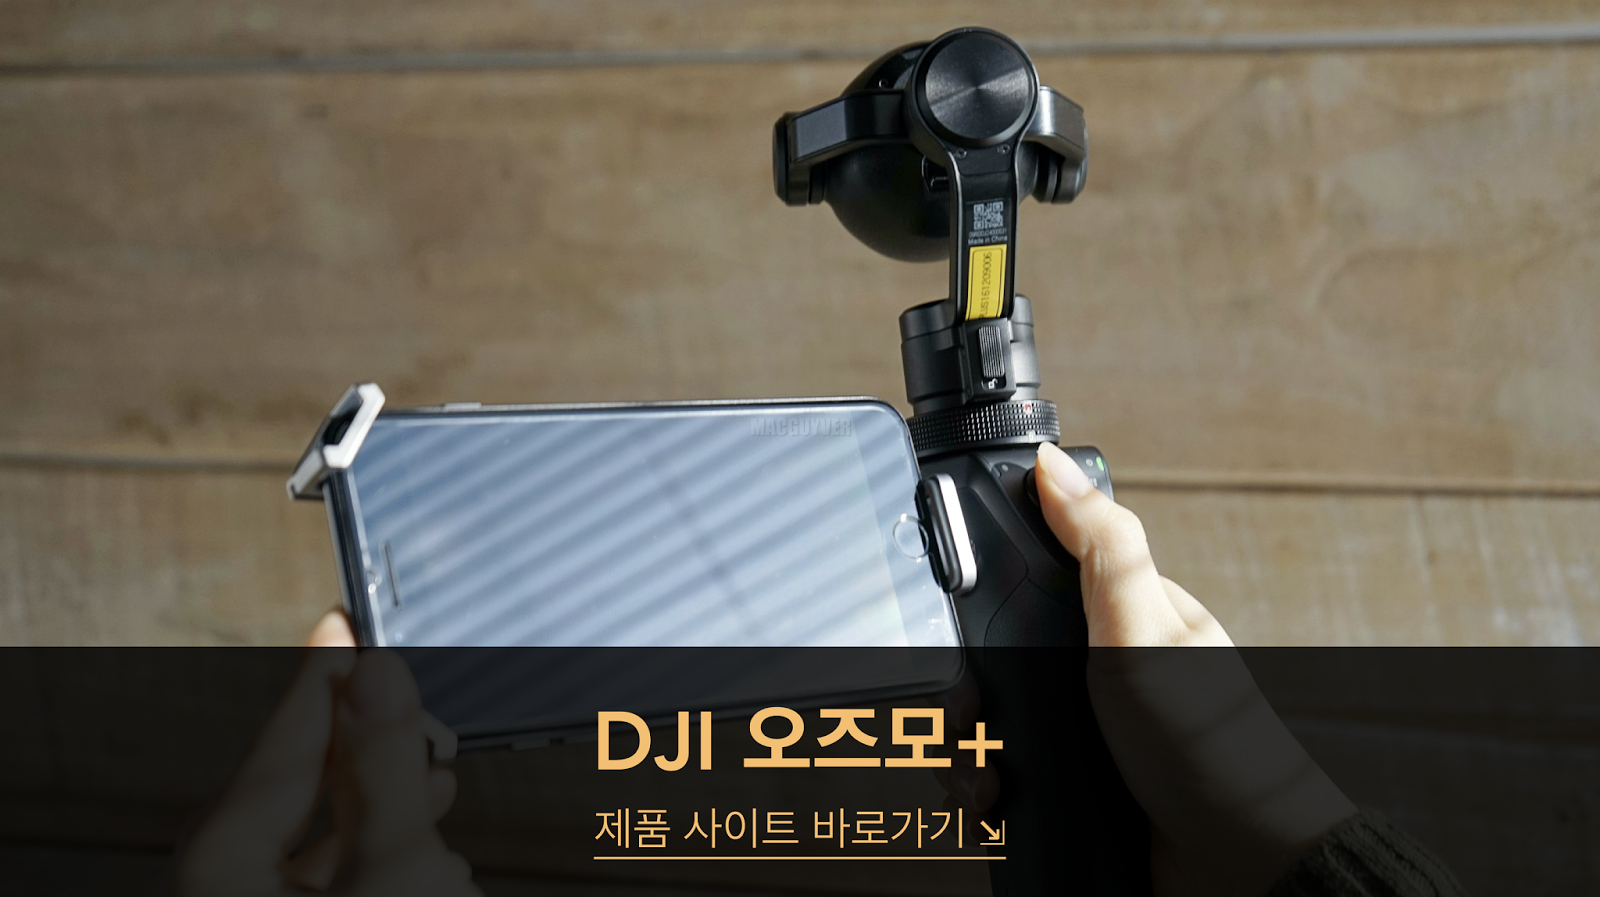 http://store.dji.com/kr/product/osmo